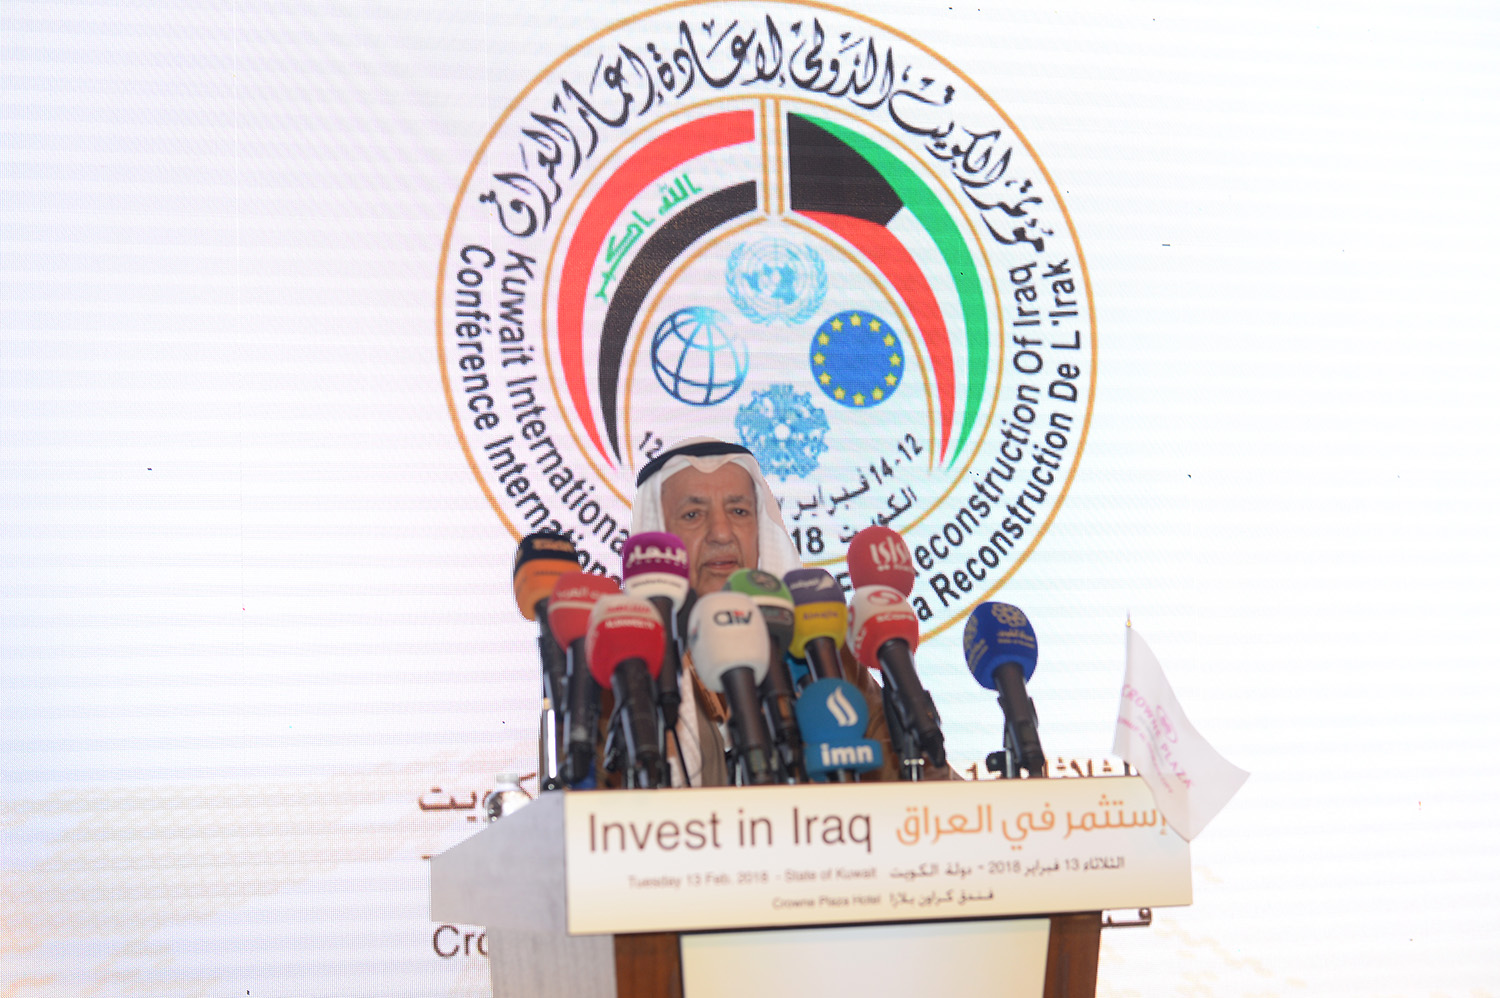 Chairman of Kuwait Chamber of Commerce and Industry (KCCI) Ali Al-Gahnim at the conference